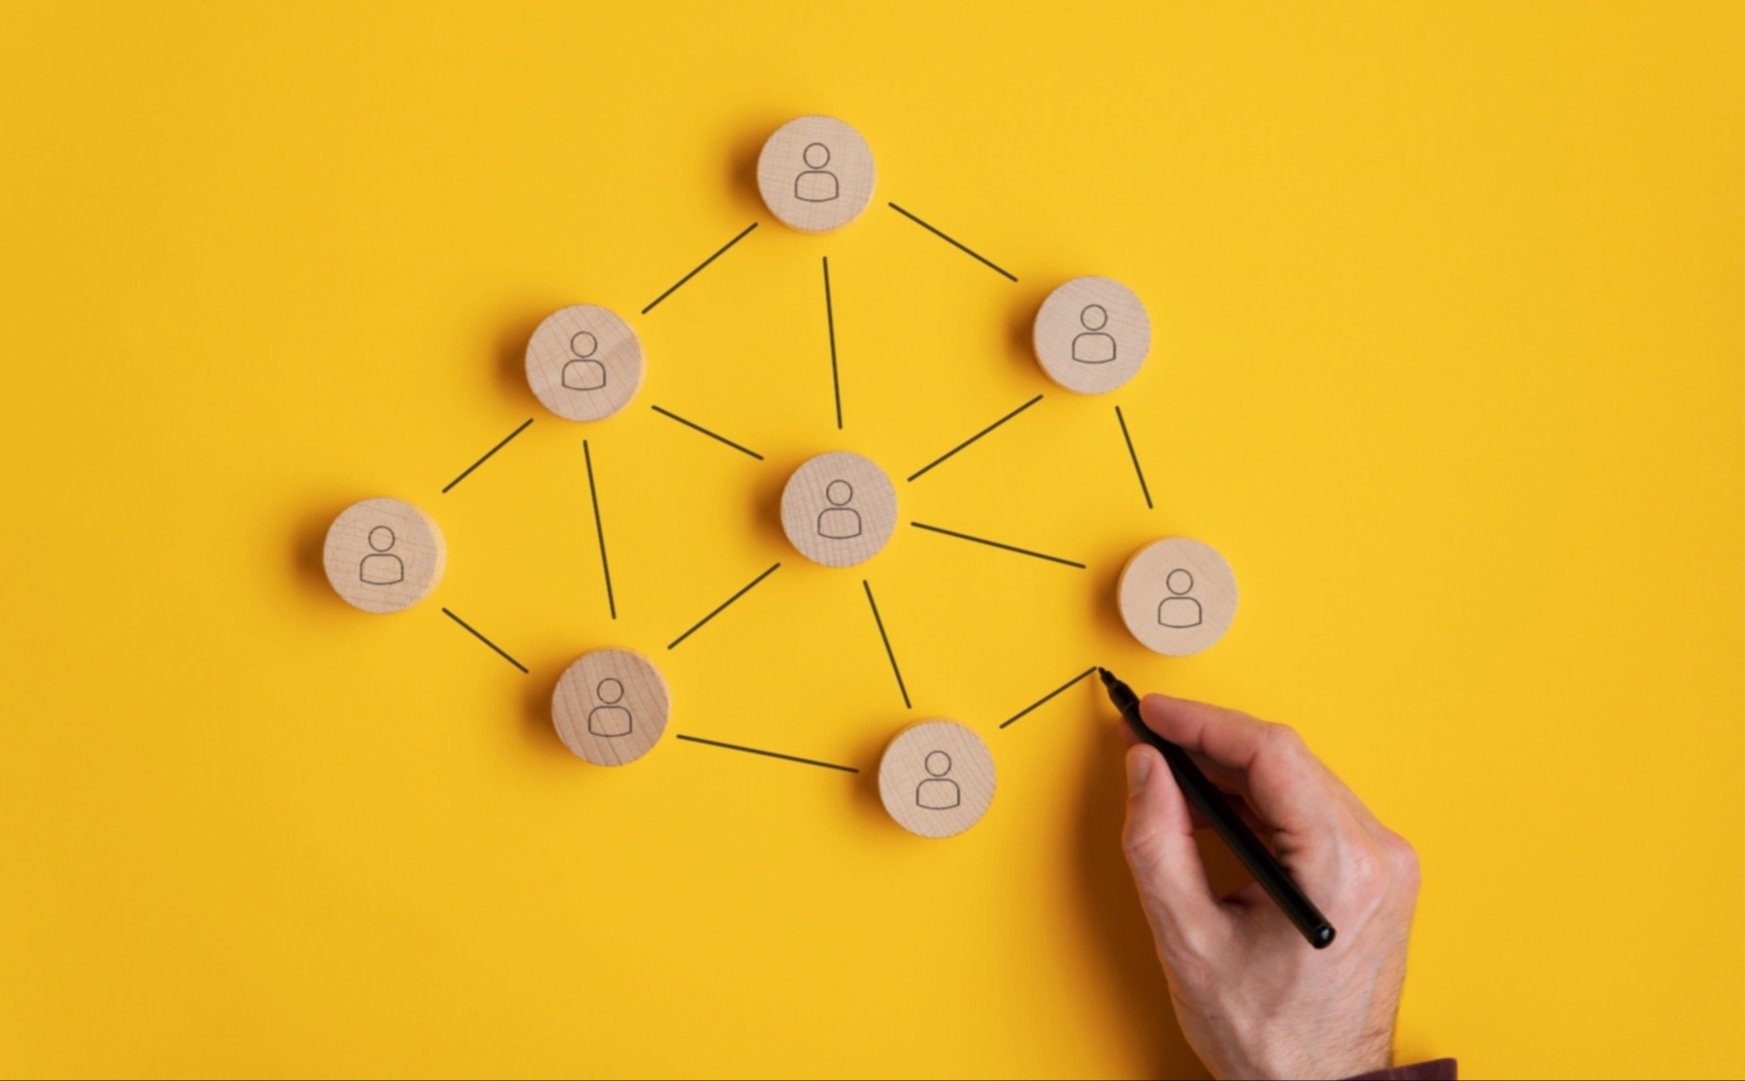 hand drawing connections between blocks with people symbols on a yellow background